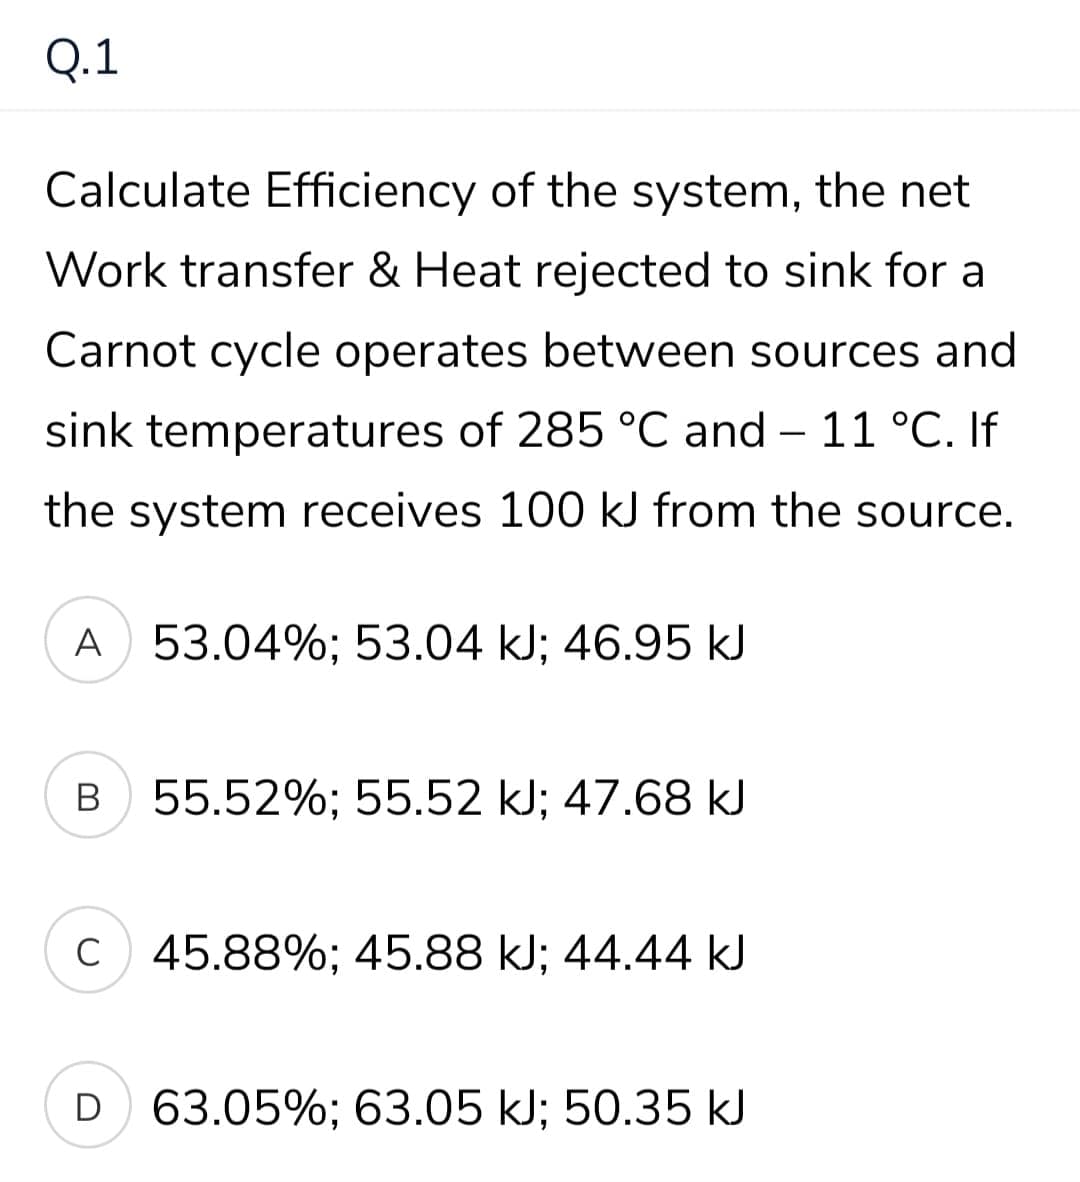 Q.1
Calculate Efficiency of the system, the net
Work transfer & Heat rejected to sink for a
Carnot cycle operates between sources and
sink temperatures of 285 °C and – 11 °C. If
the system receives 100 kJ from the source.
A 53.04%; 53.04 kJ; 46.95 kJ
В
55.52%; 55.52 kJ; 47.68 kJ
C 45.88%; 45.88 kJ; 44.44 kJ
D 63.05%; 63.05 kJ; 50.35 kJ
